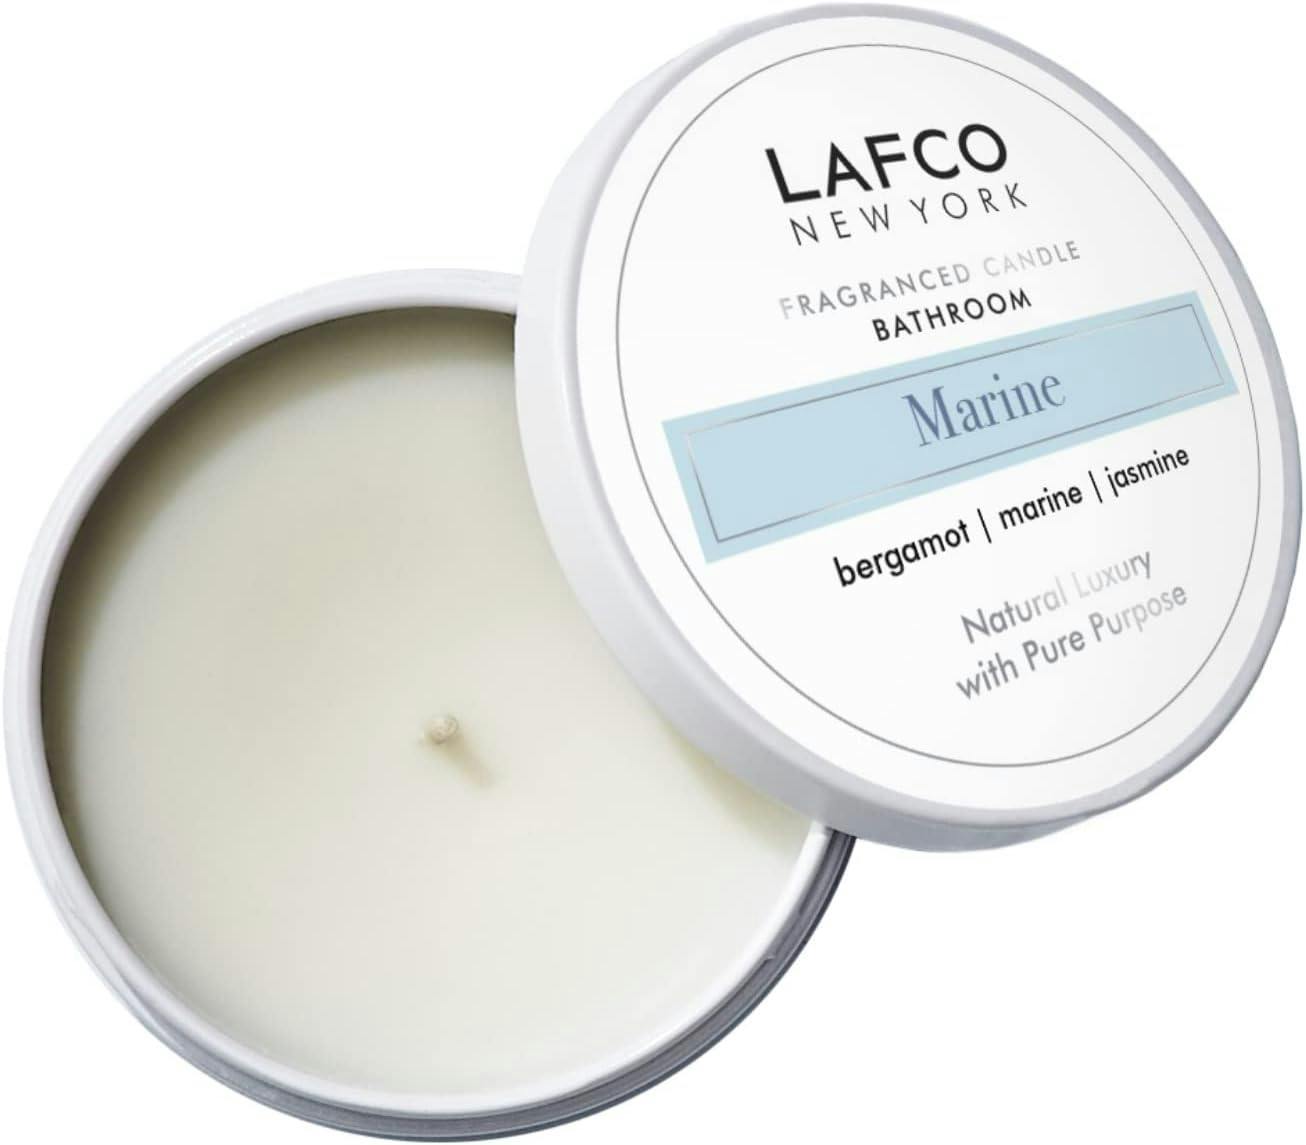 Marine Essence Travel Candle 4oz - White Soy Wax with Fresh Scent